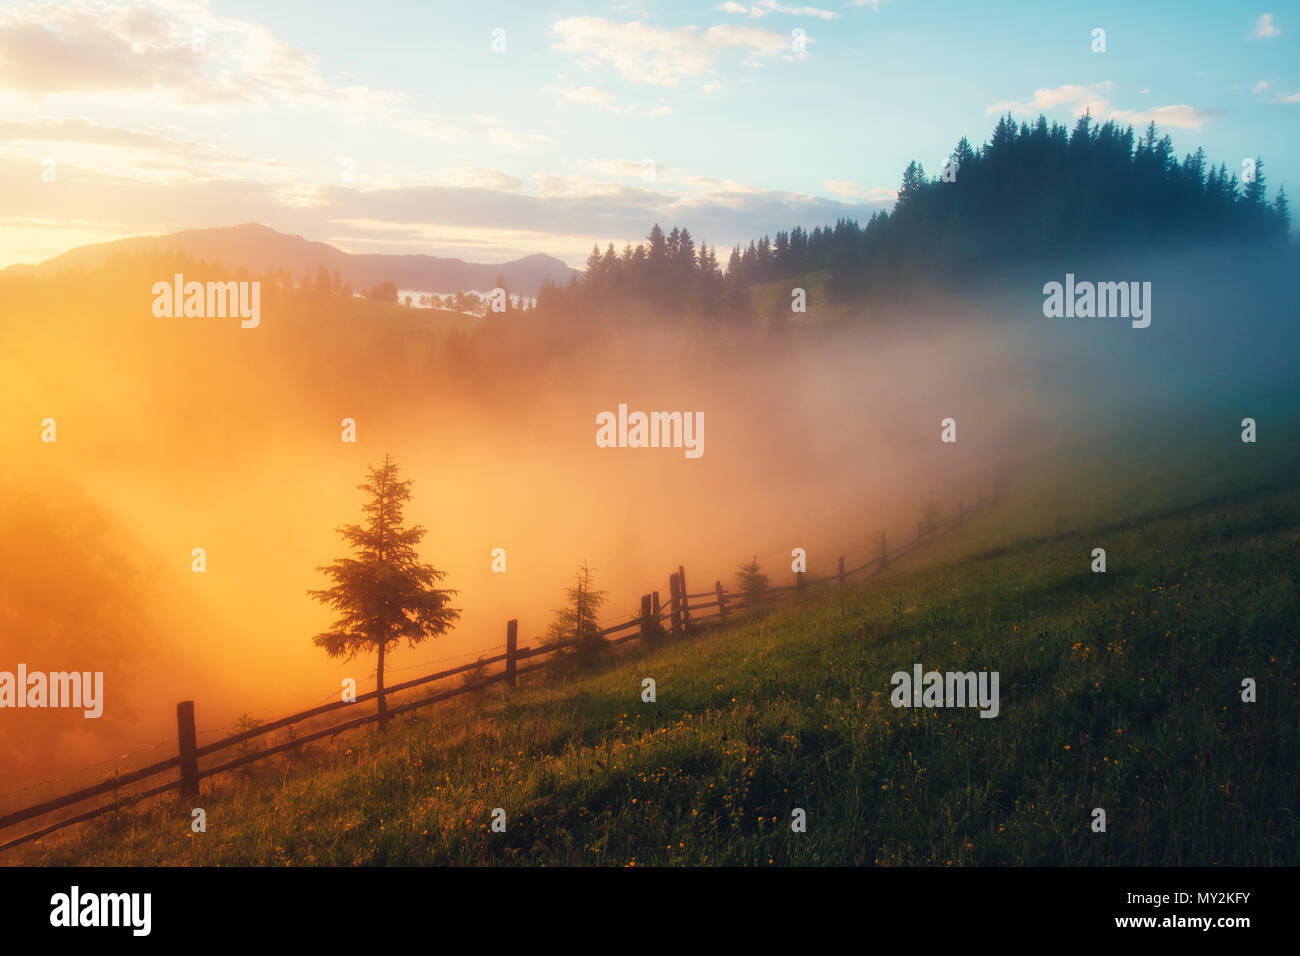 Mountain valley during sunrise Stock Photo